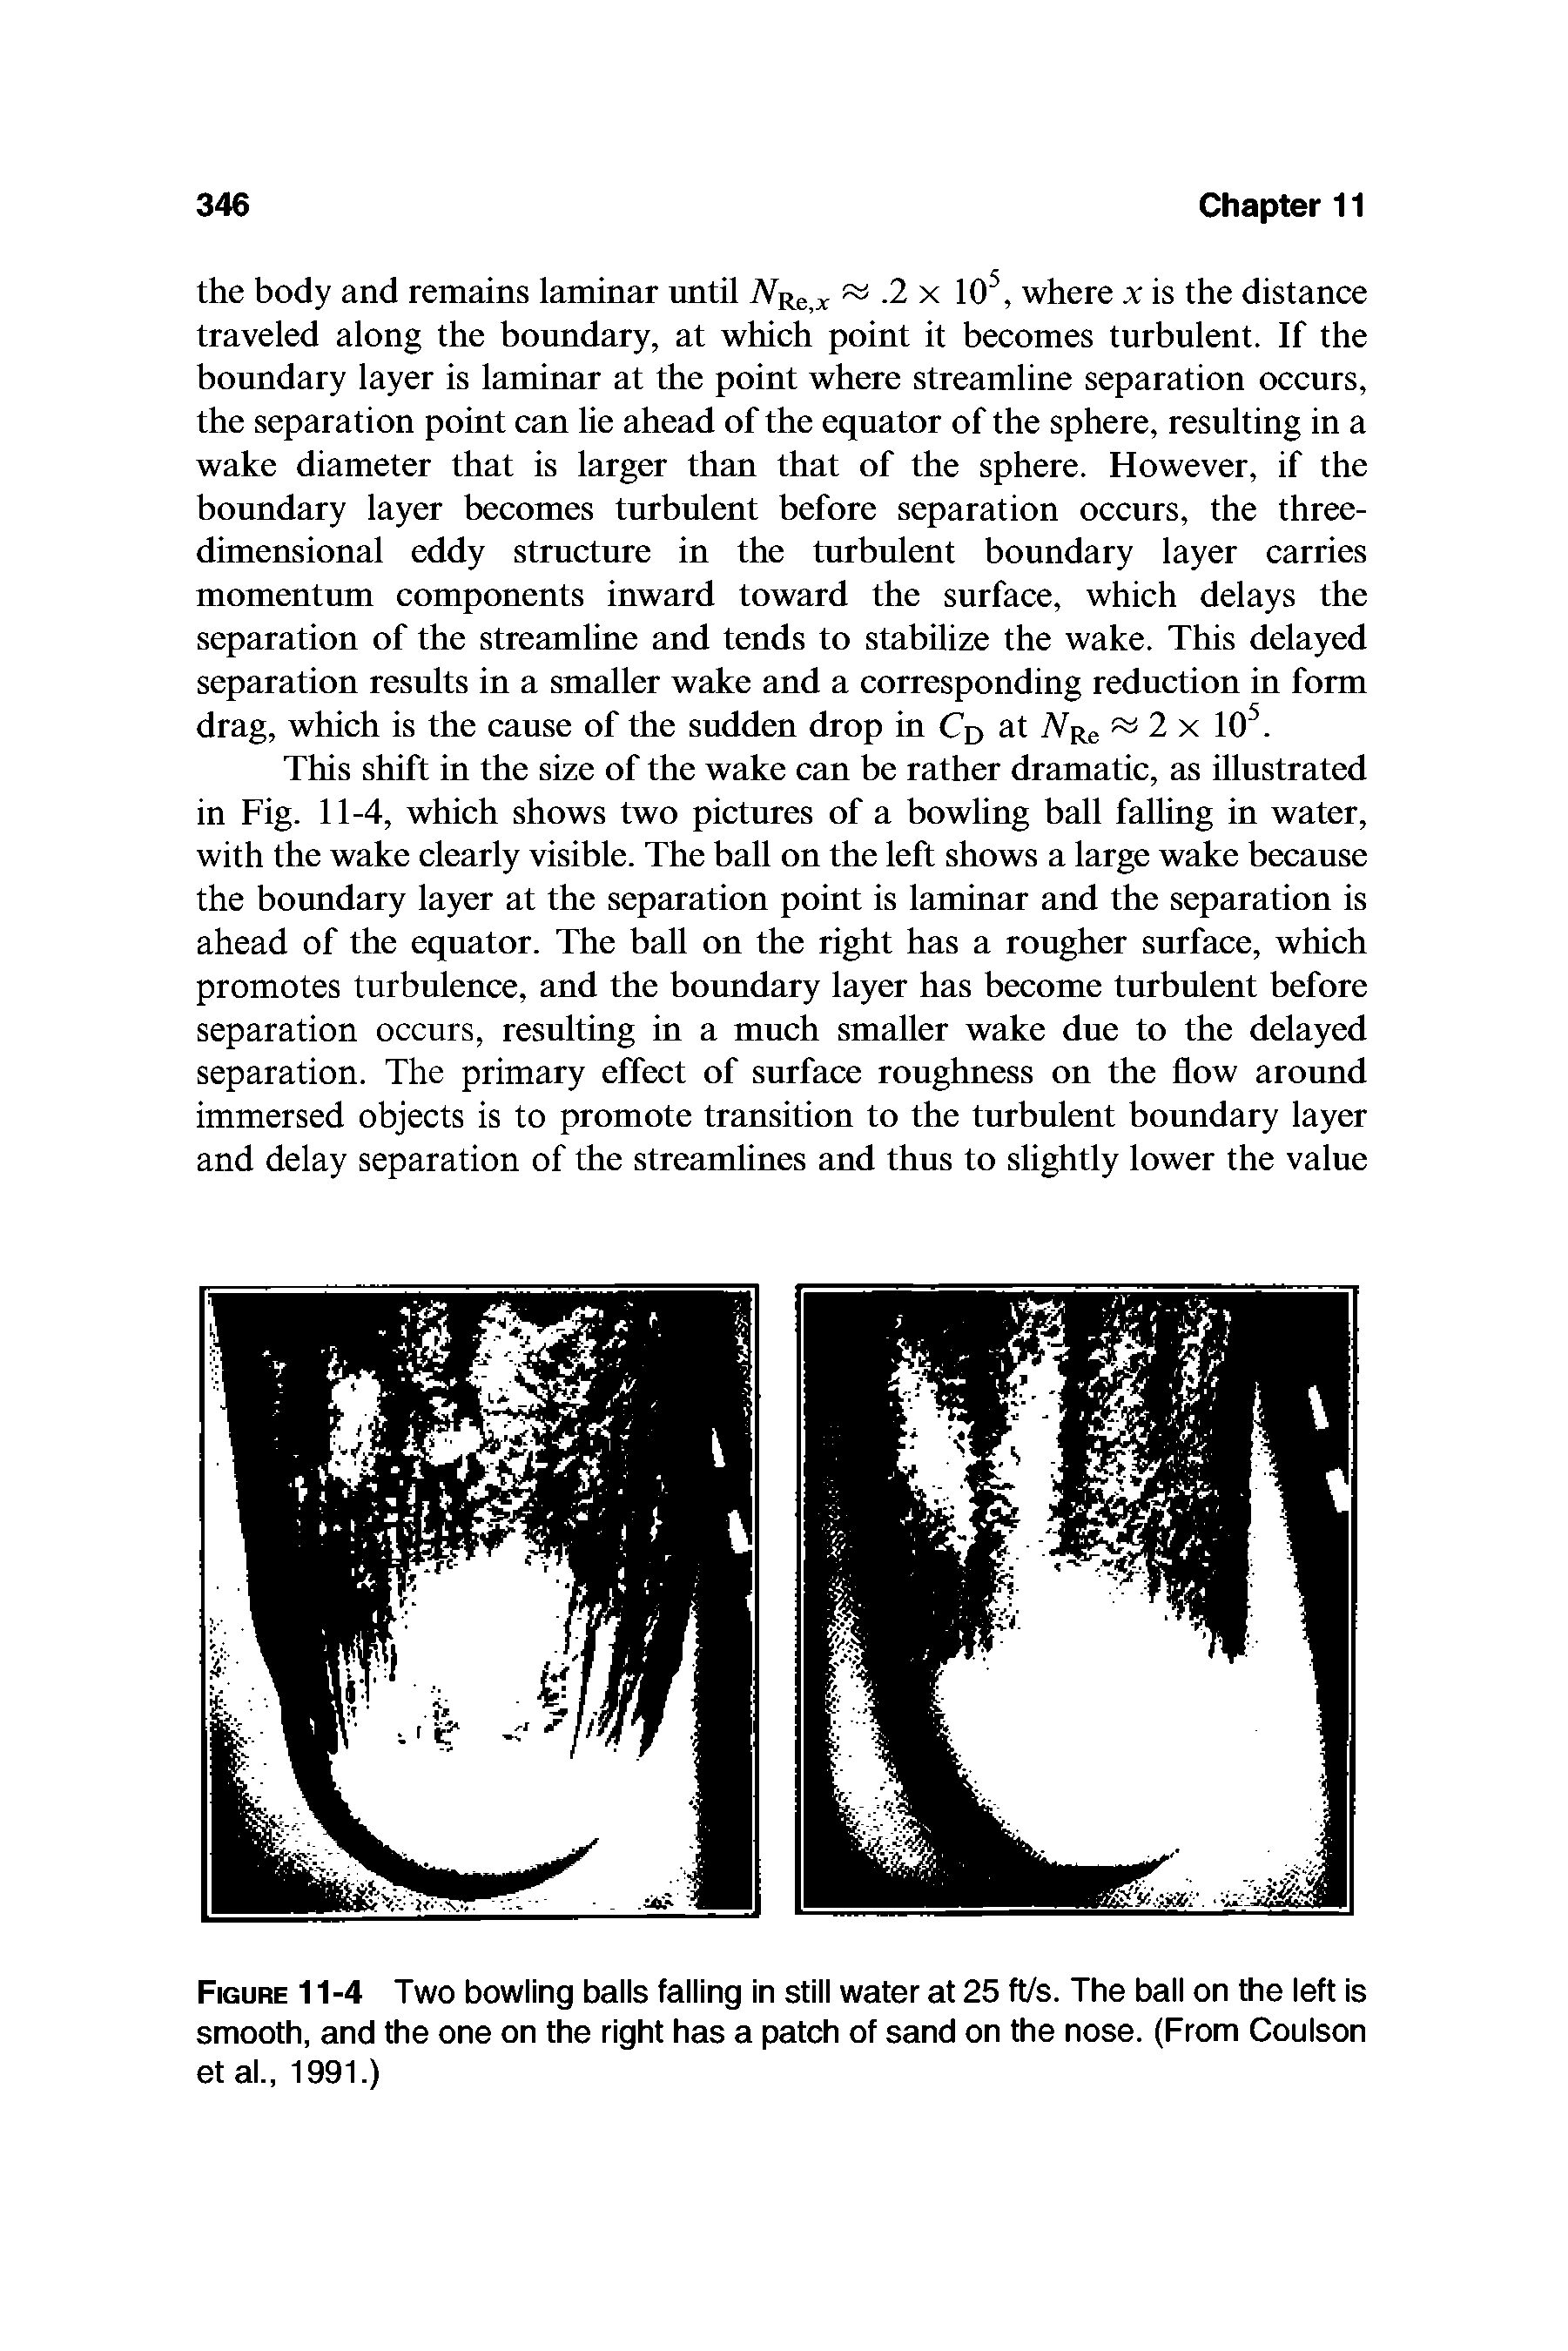 Figure 11-4 Two bowling balls falling in still water at 25 ft/s. The ball on the left is smooth, and the one on the right has a patch of sand on the nose. (From Coulson et at, 1991.)...